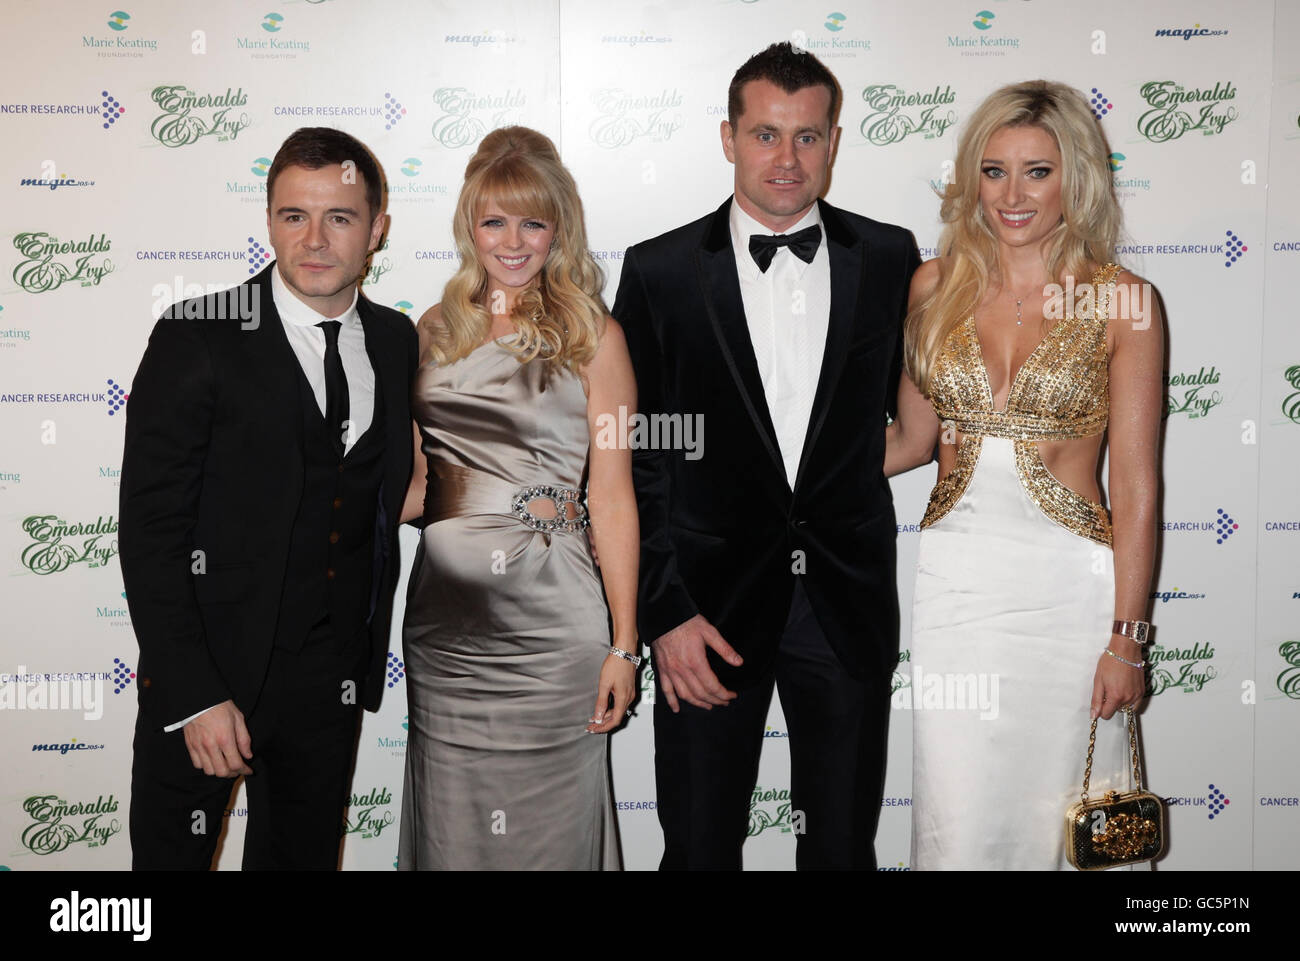 Shane Filan from Westlife (left) and his wife Gillian Walsh and goalkeeper Shay Given and his wife Jane arriving for the Emeralds and Ivy Ball - in aid of Cancer Research UK - at Battersea Evolution in south London. Stock Photo